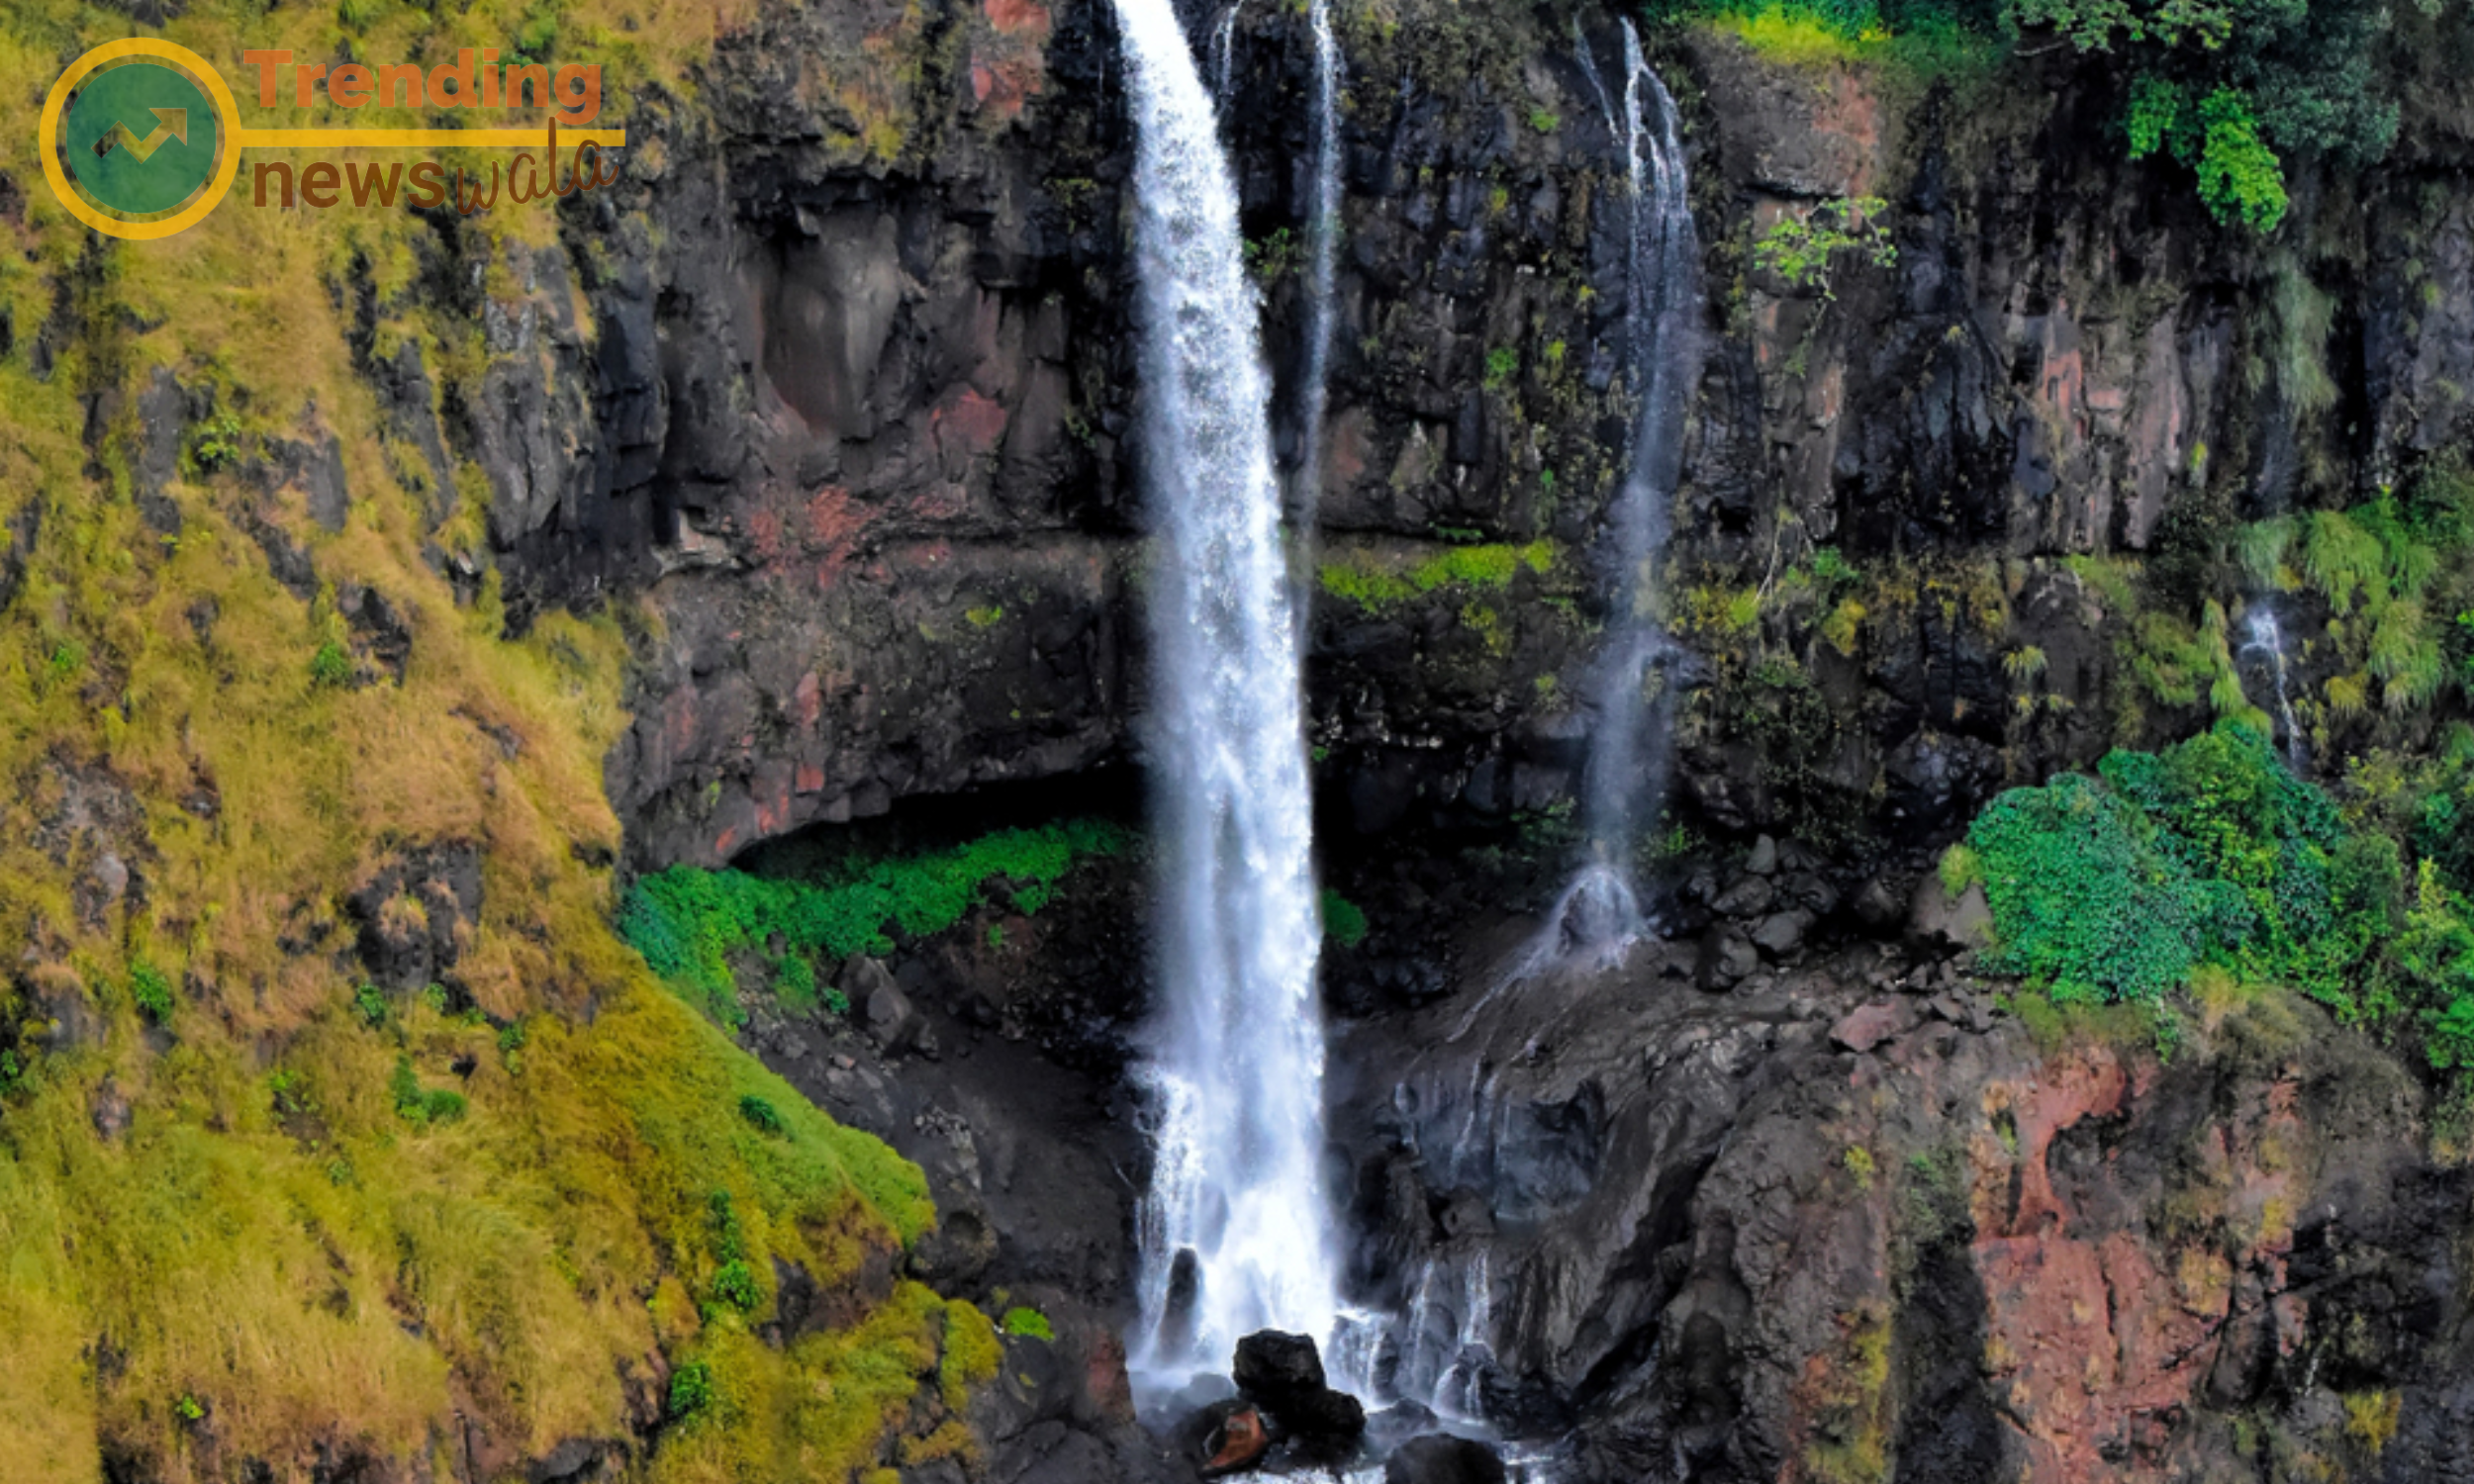 Cascading from a height of 600 feet, Lingmala Waterfall